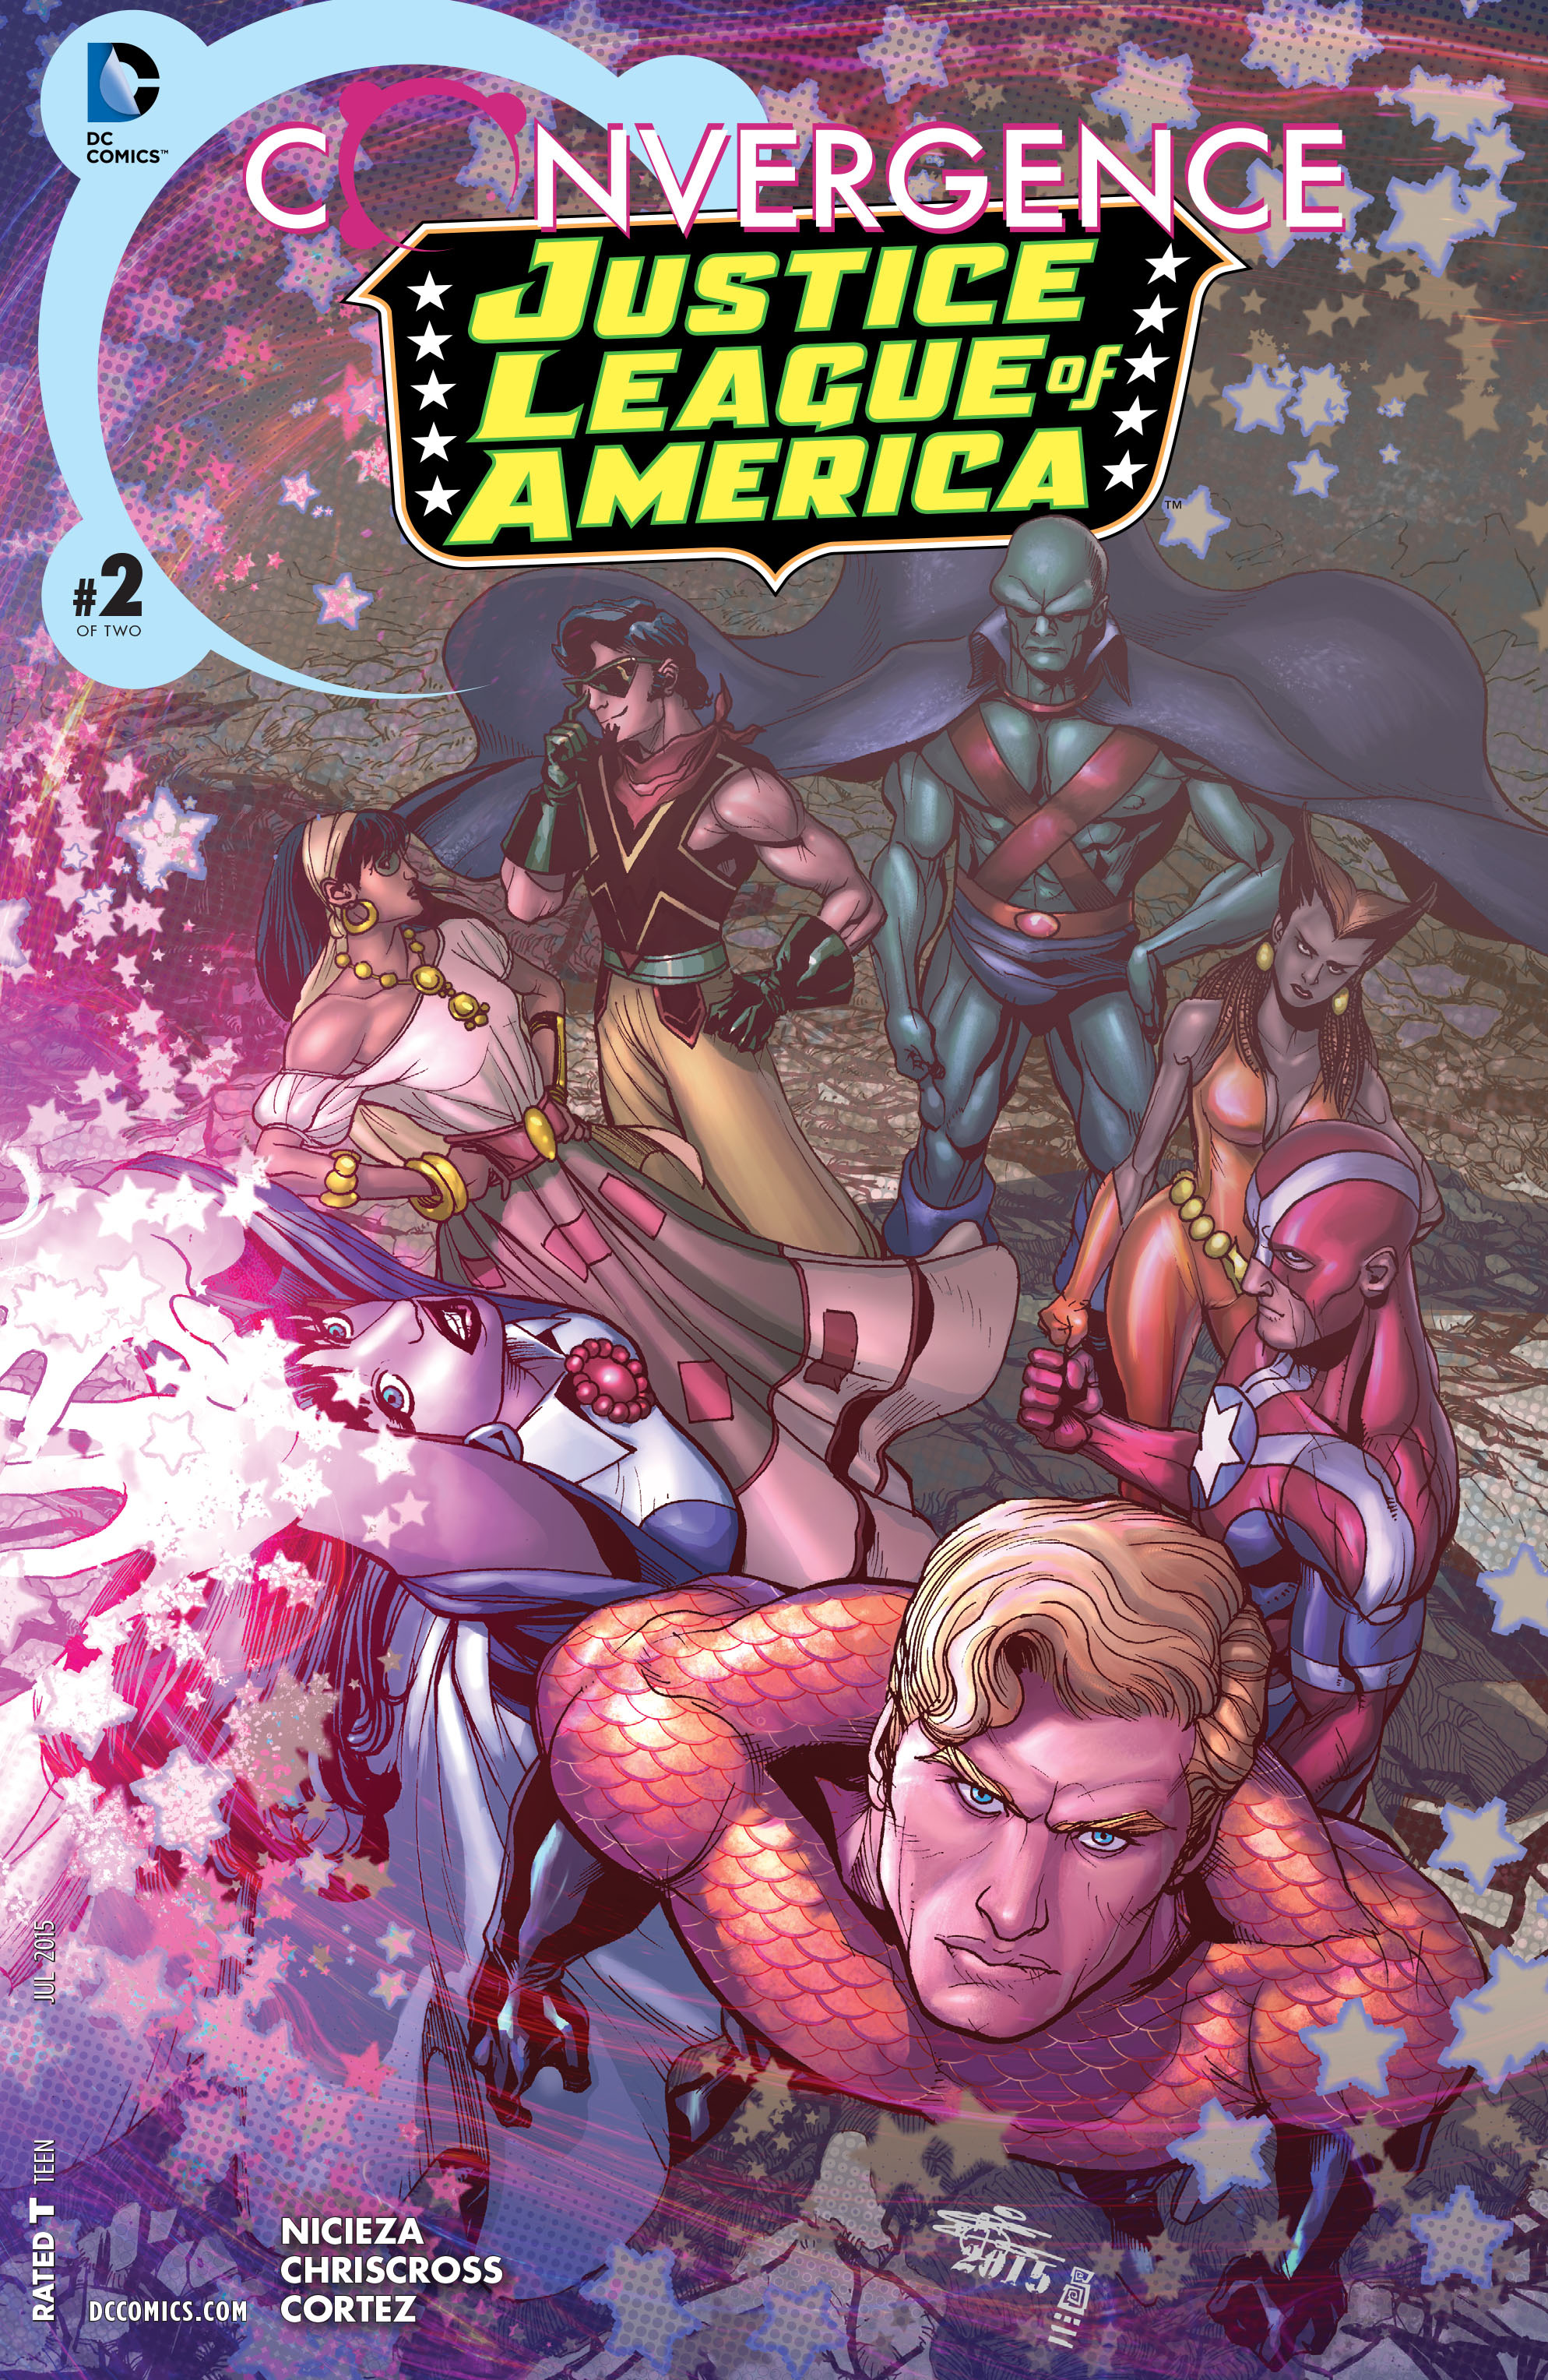 Read online Convergence Justice League of America comic -  Issue #2 - 1